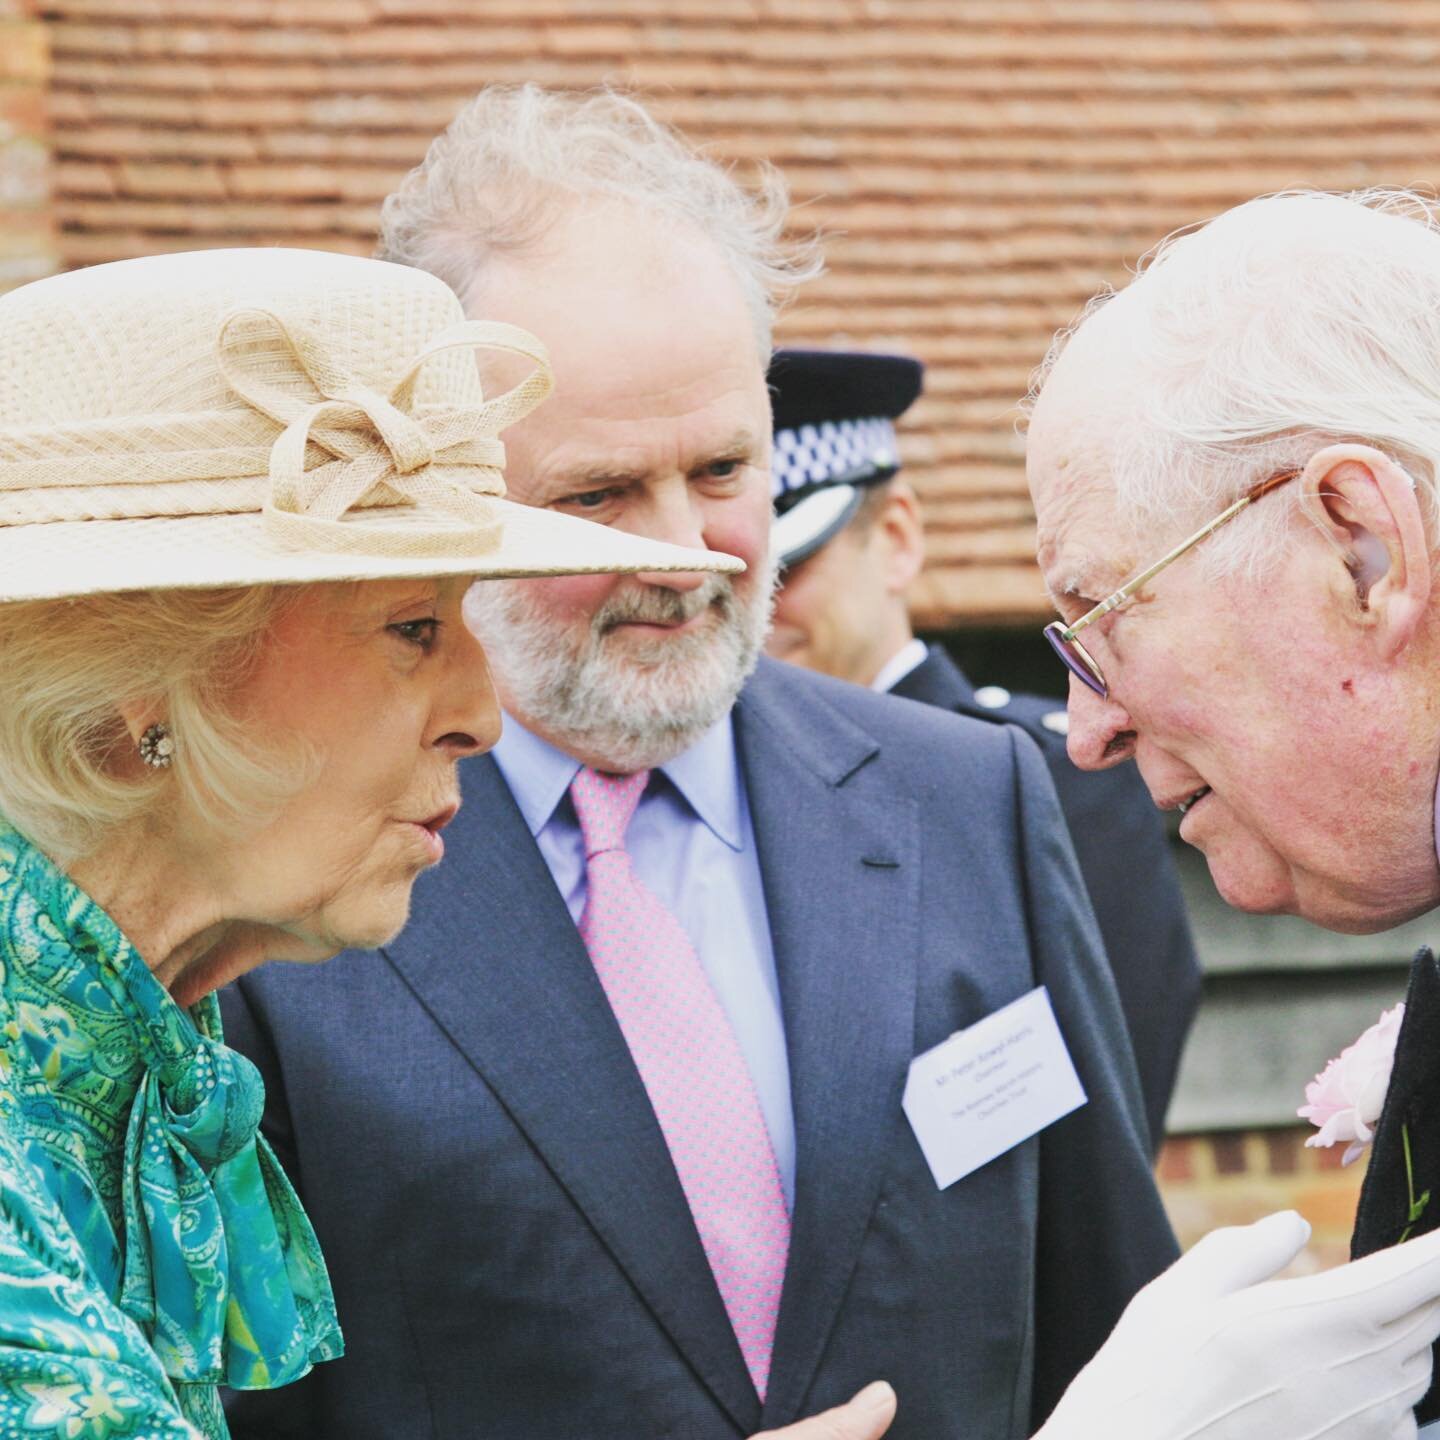 When our president John Doyle and chairman Peter Anwyl-Harris met HRH Princess Alexandra. We organised her tour of the churches of the Marsh this Summer. A wonderful day. #royalvisit #romneymarsh #marshchurches #princessalexandra  #romneymarshchurche